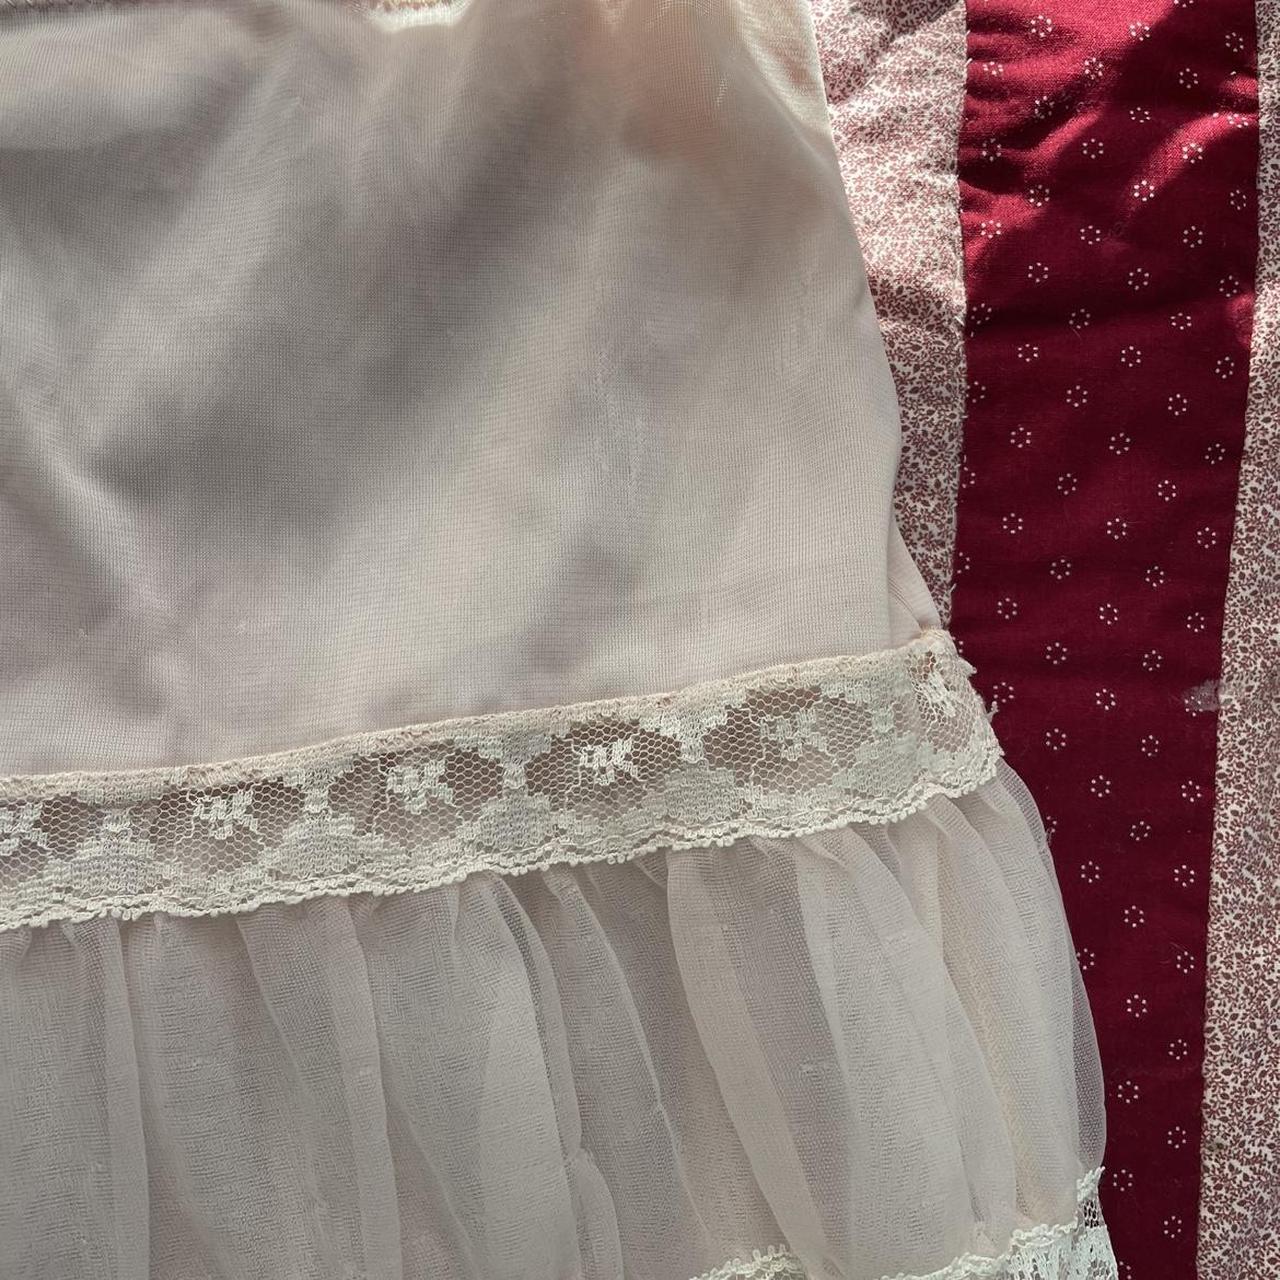 American Vintage Women's Cream and Pink Skirt (2)